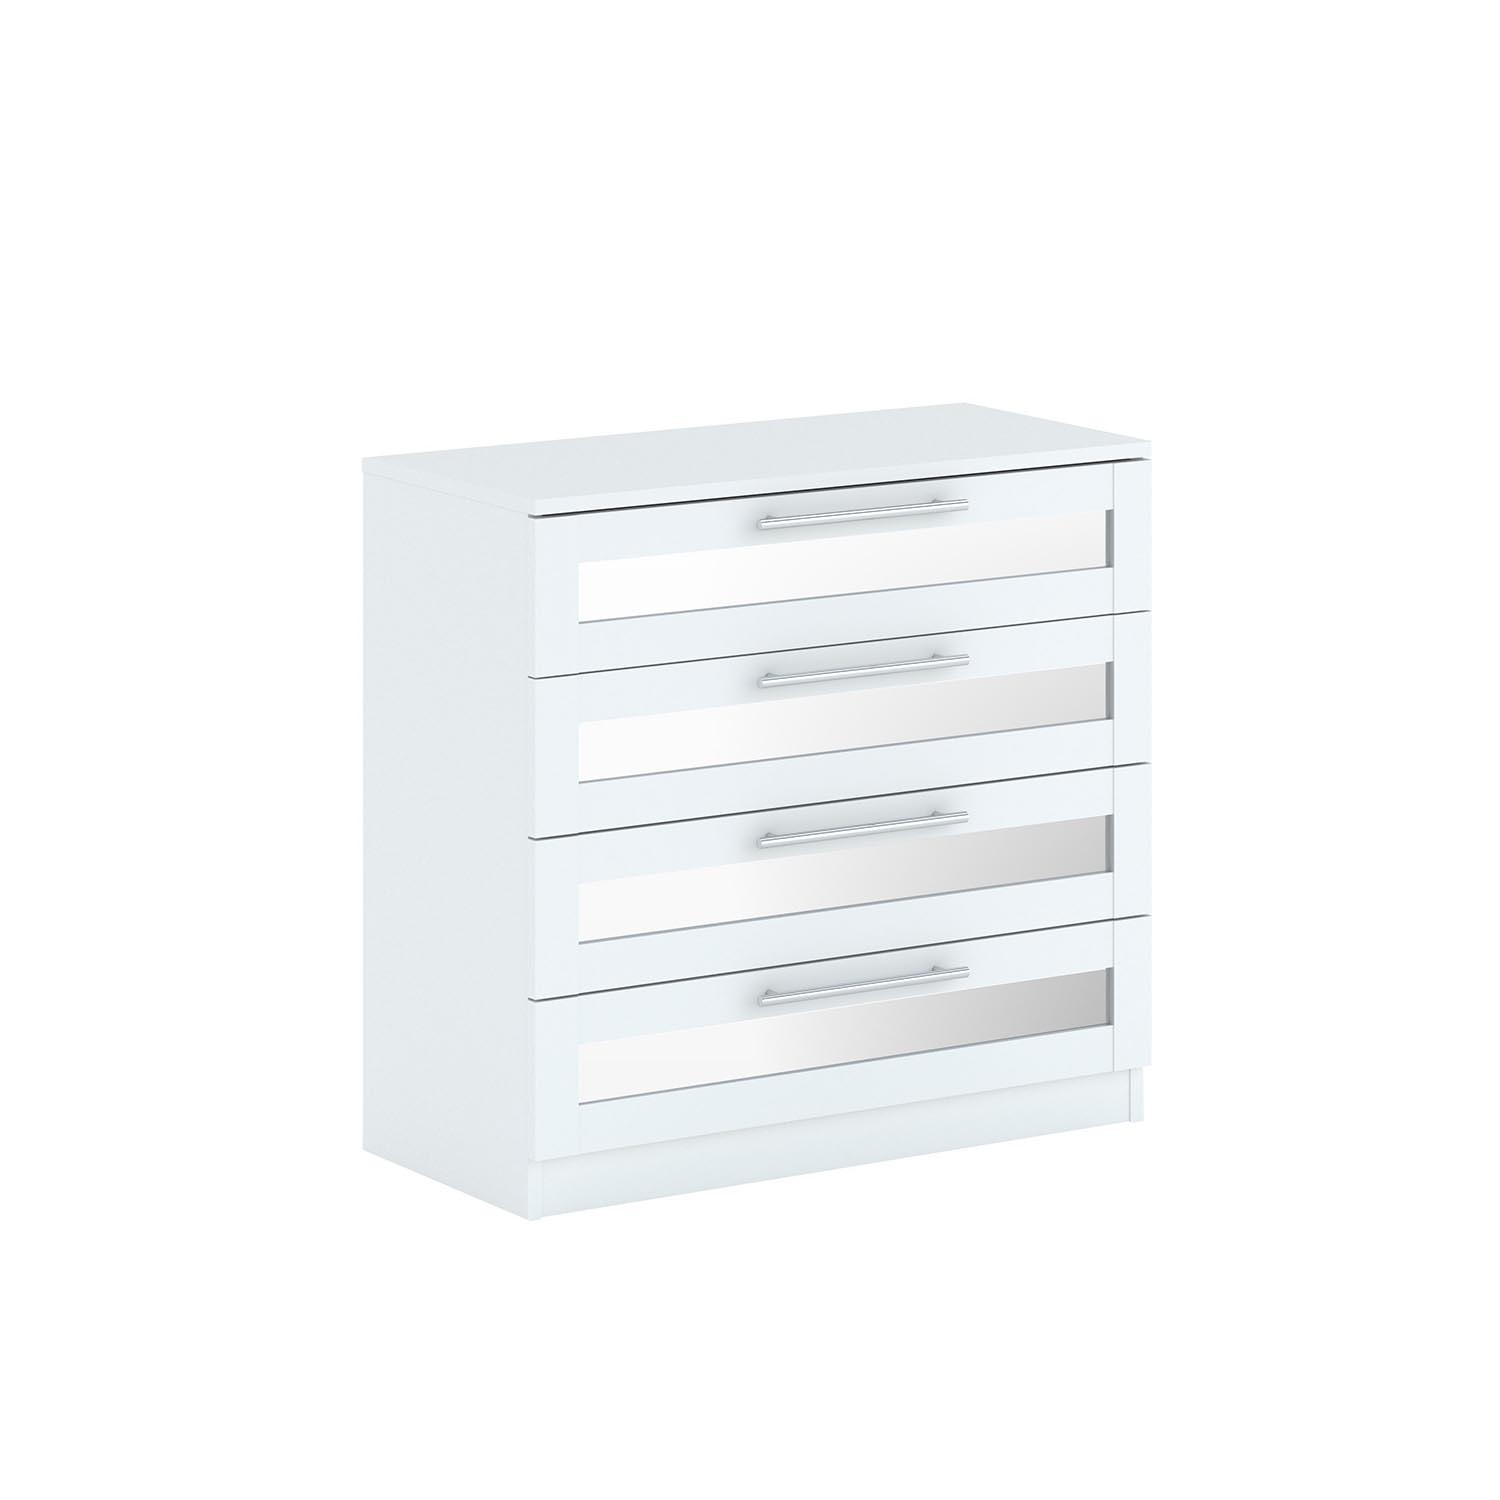 Finley 4 Drawer White Mirrored Chest of Drawers Image 3